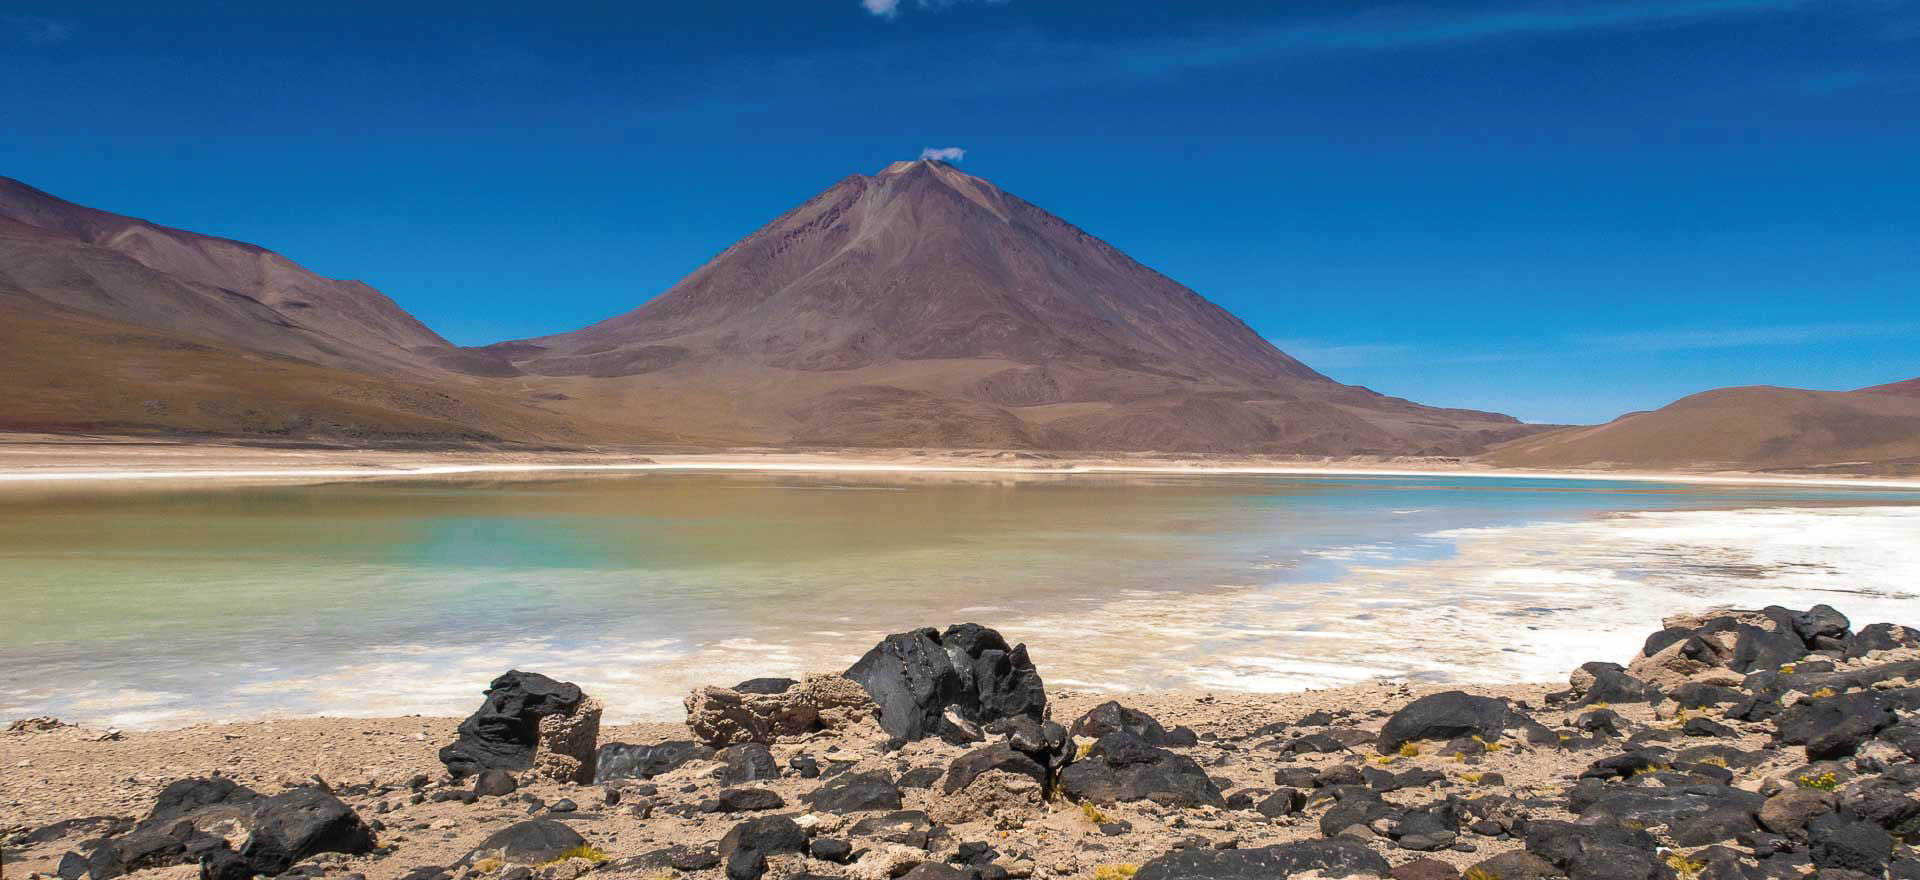 Volcanic peak on the altiplano - Bolivia holidays and tours